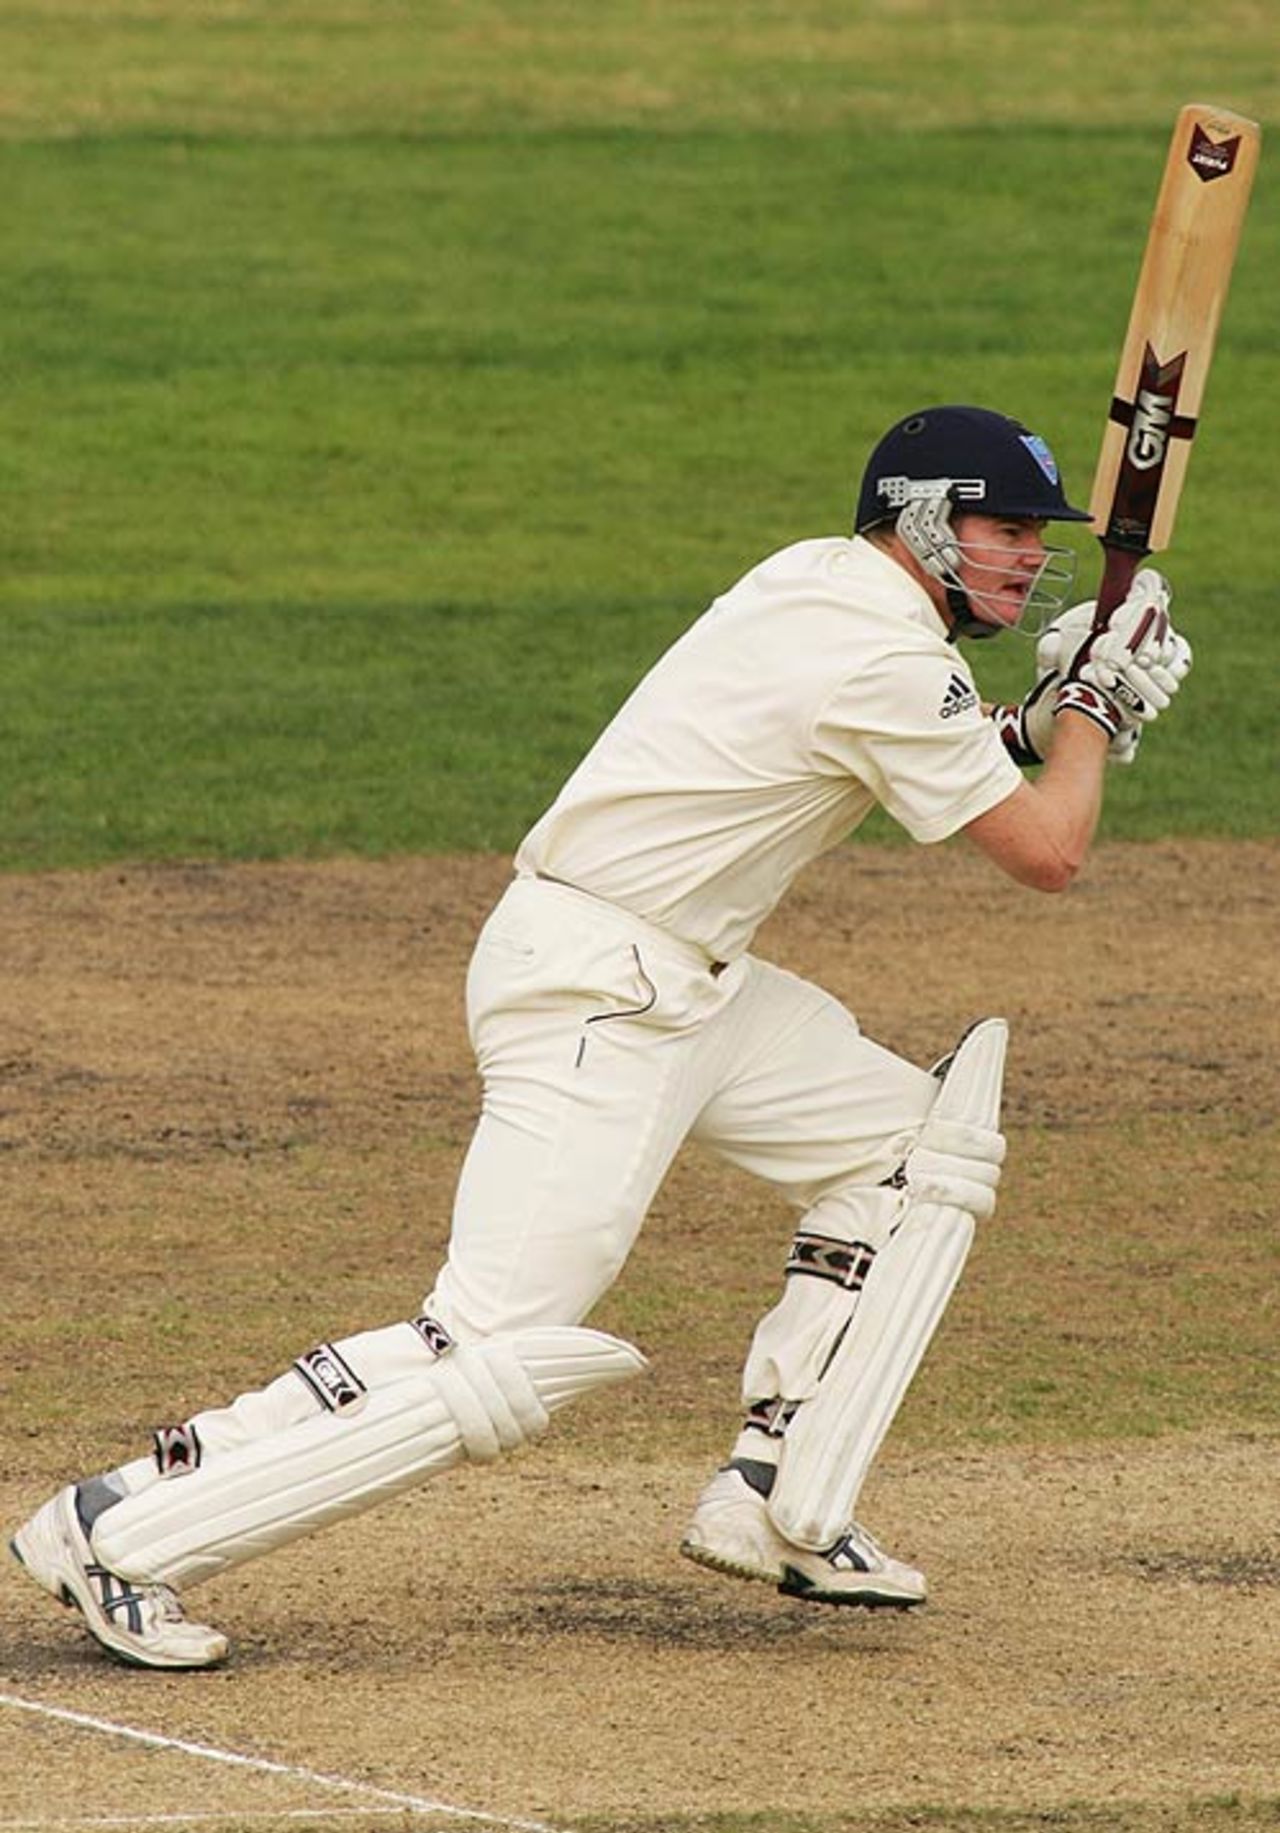 Grant Lambert gets ready to take off for a single, Tasmania v New South Wales, Pura Cup final, Hobart, March 20, 2007